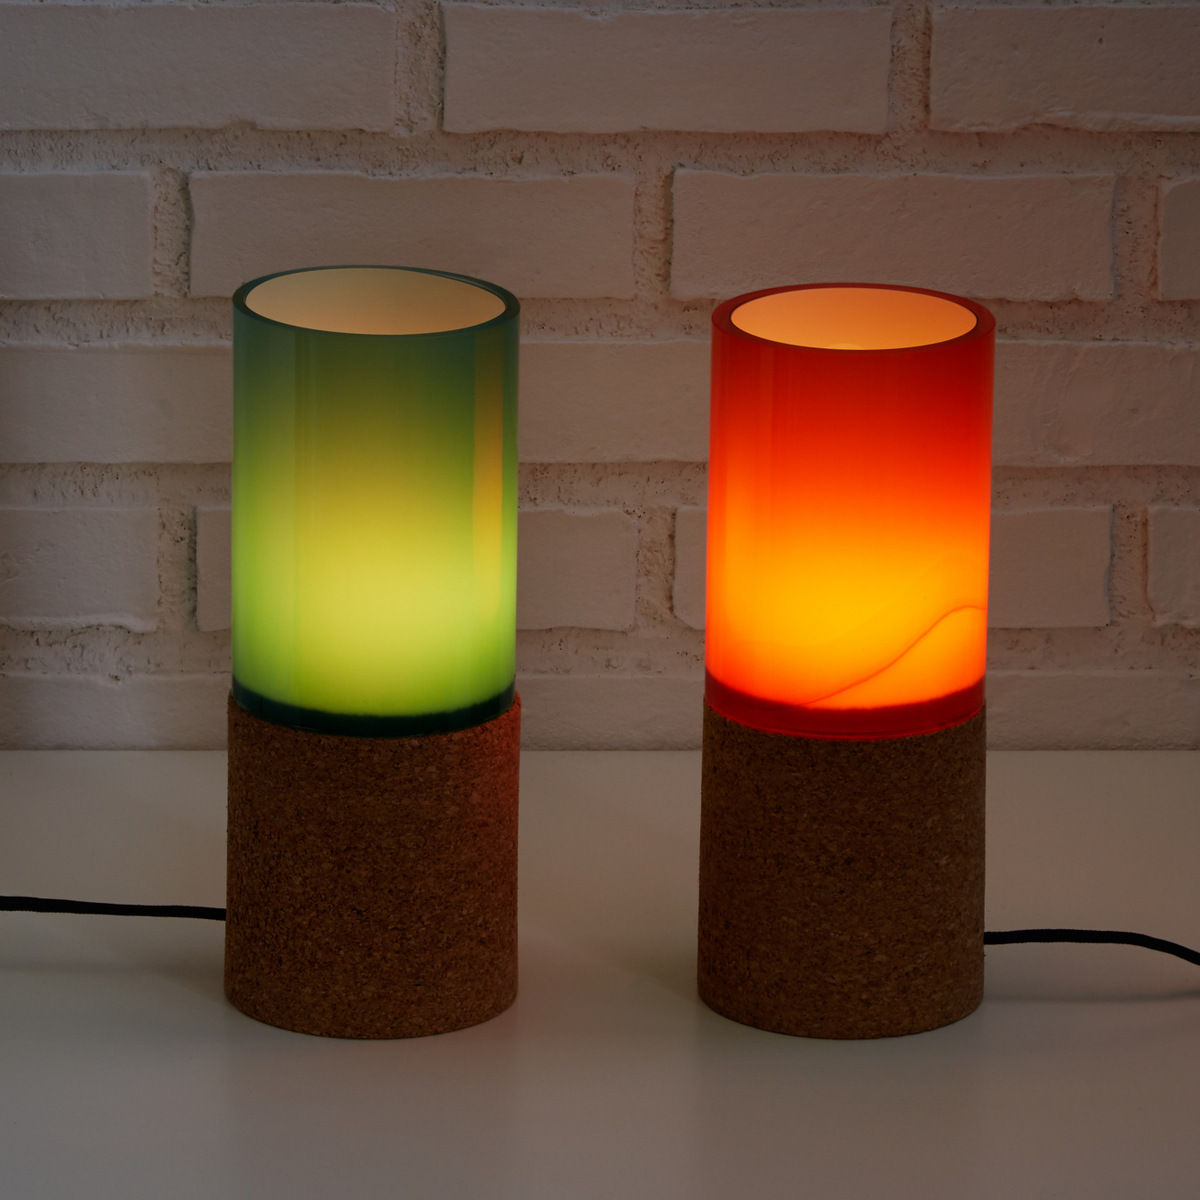 Desk lamps from Uncommon Goods